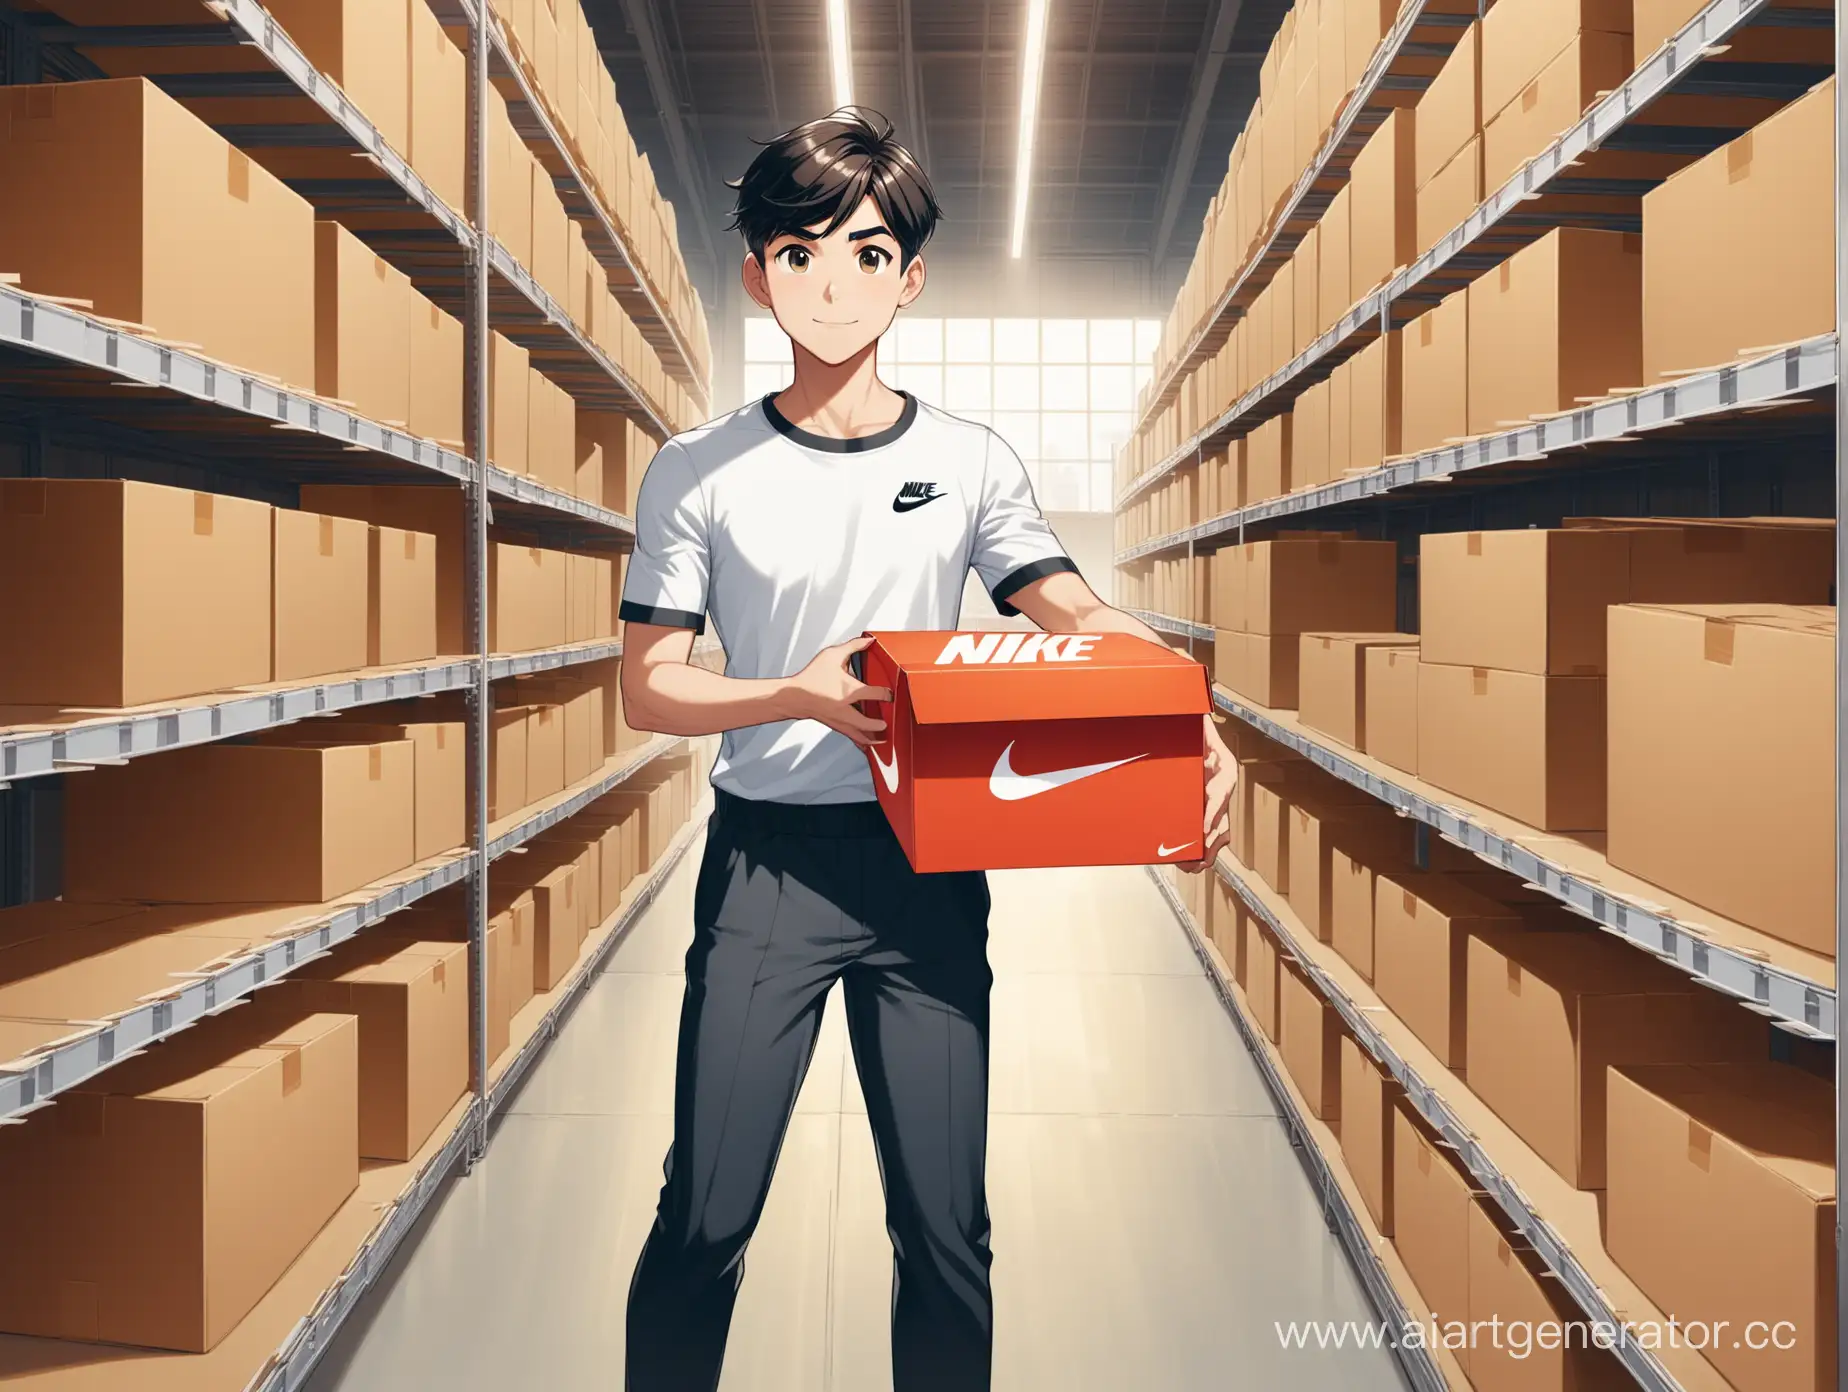 Cartoonish-Boy-with-Nike-Sneakers-in-Warehouse